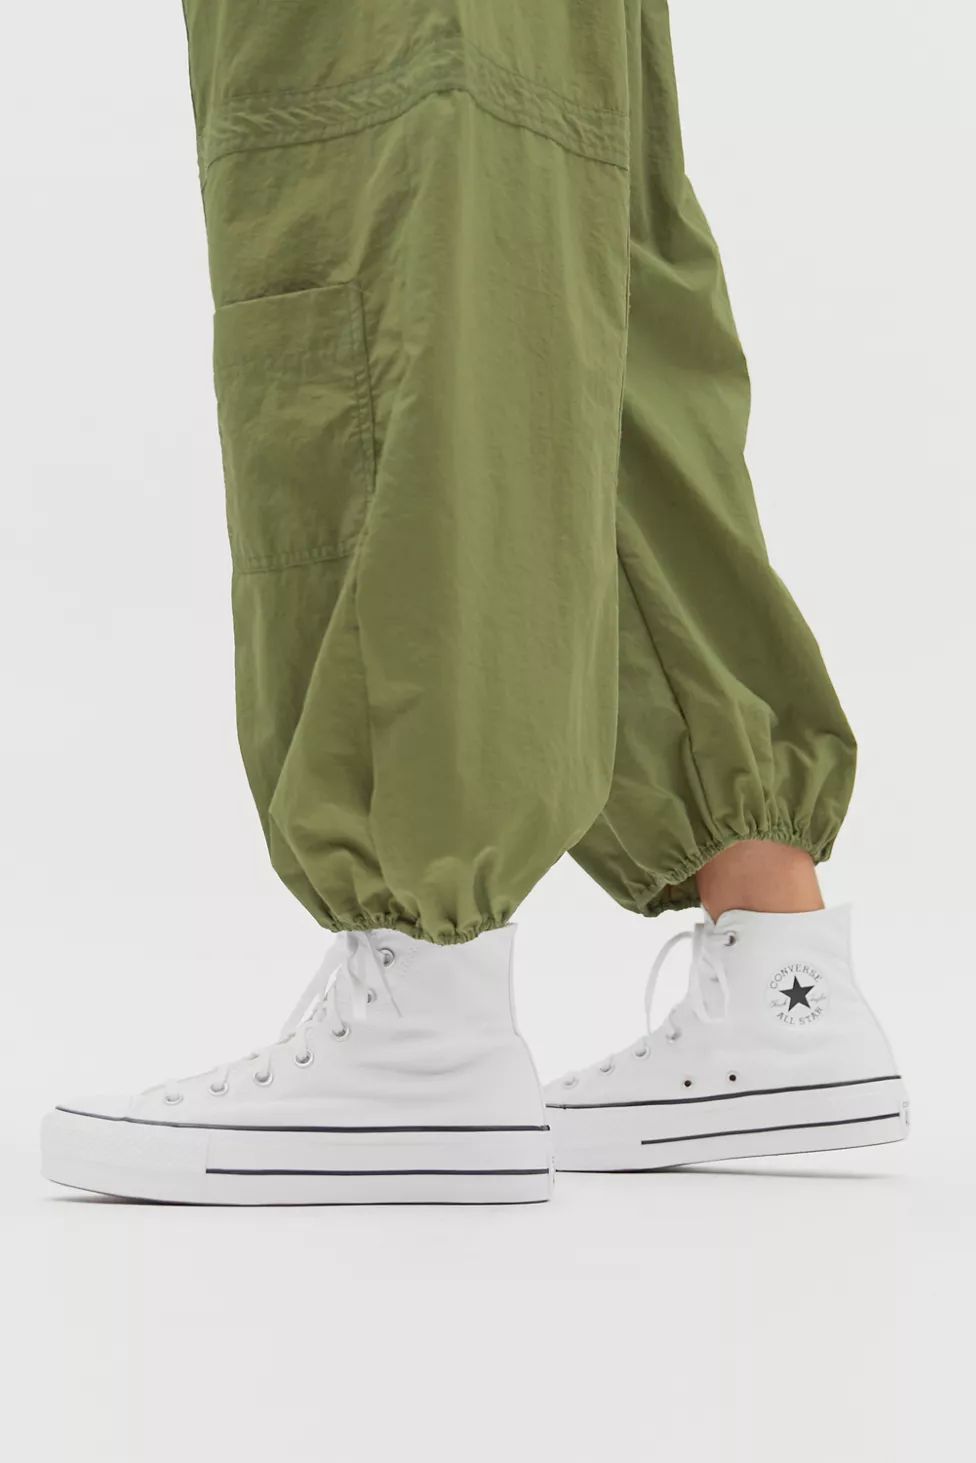 Converse Chuck Taylor All Star Canvas Platform High Top Sneaker | Urban Outfitters (US and RoW)